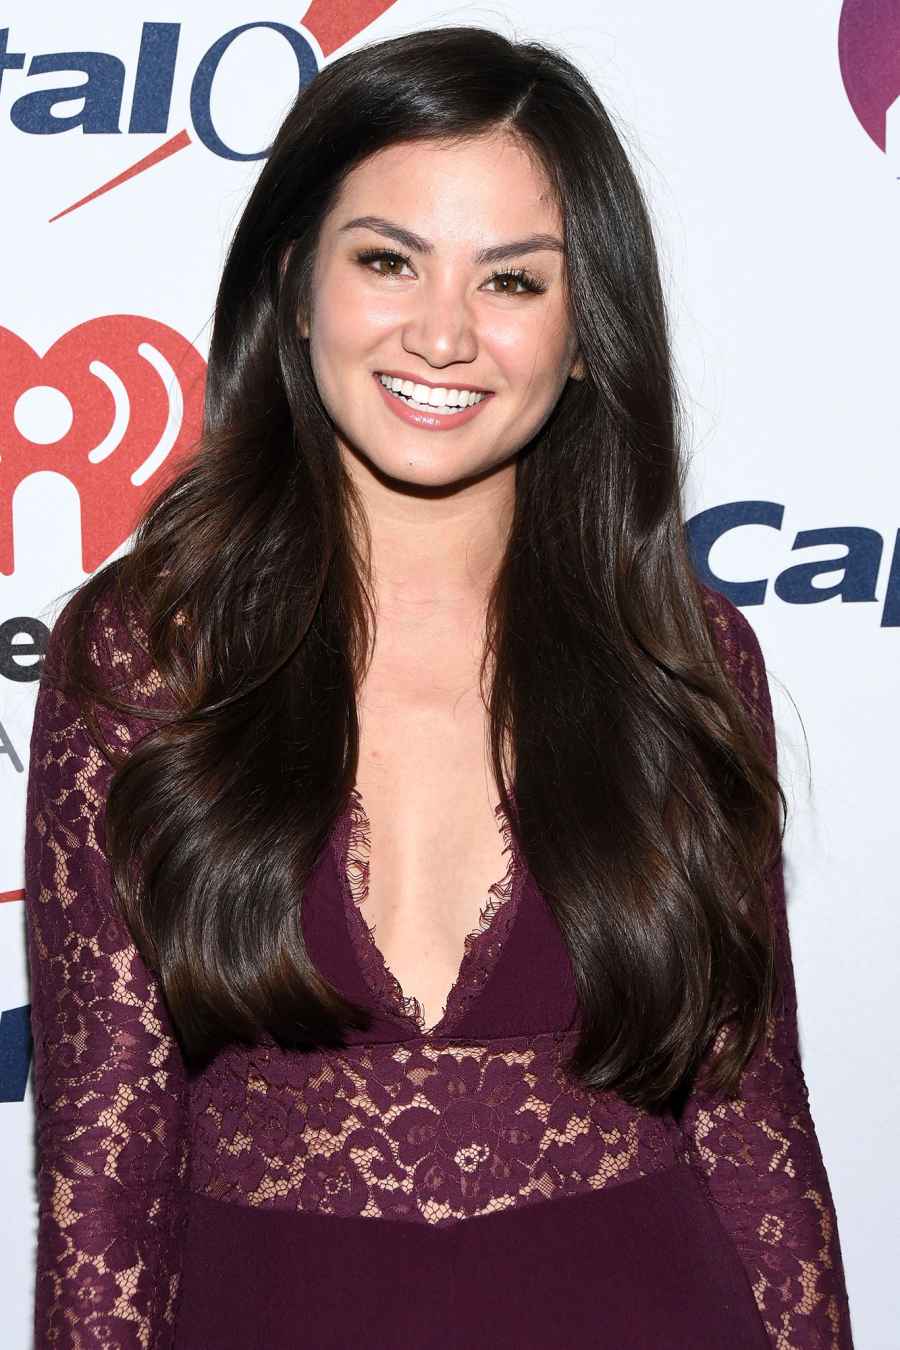 Caila Quinn Katie Thurston Suggests Greg Grippo Gastlighted Her as Bachelor Nation Weighs In